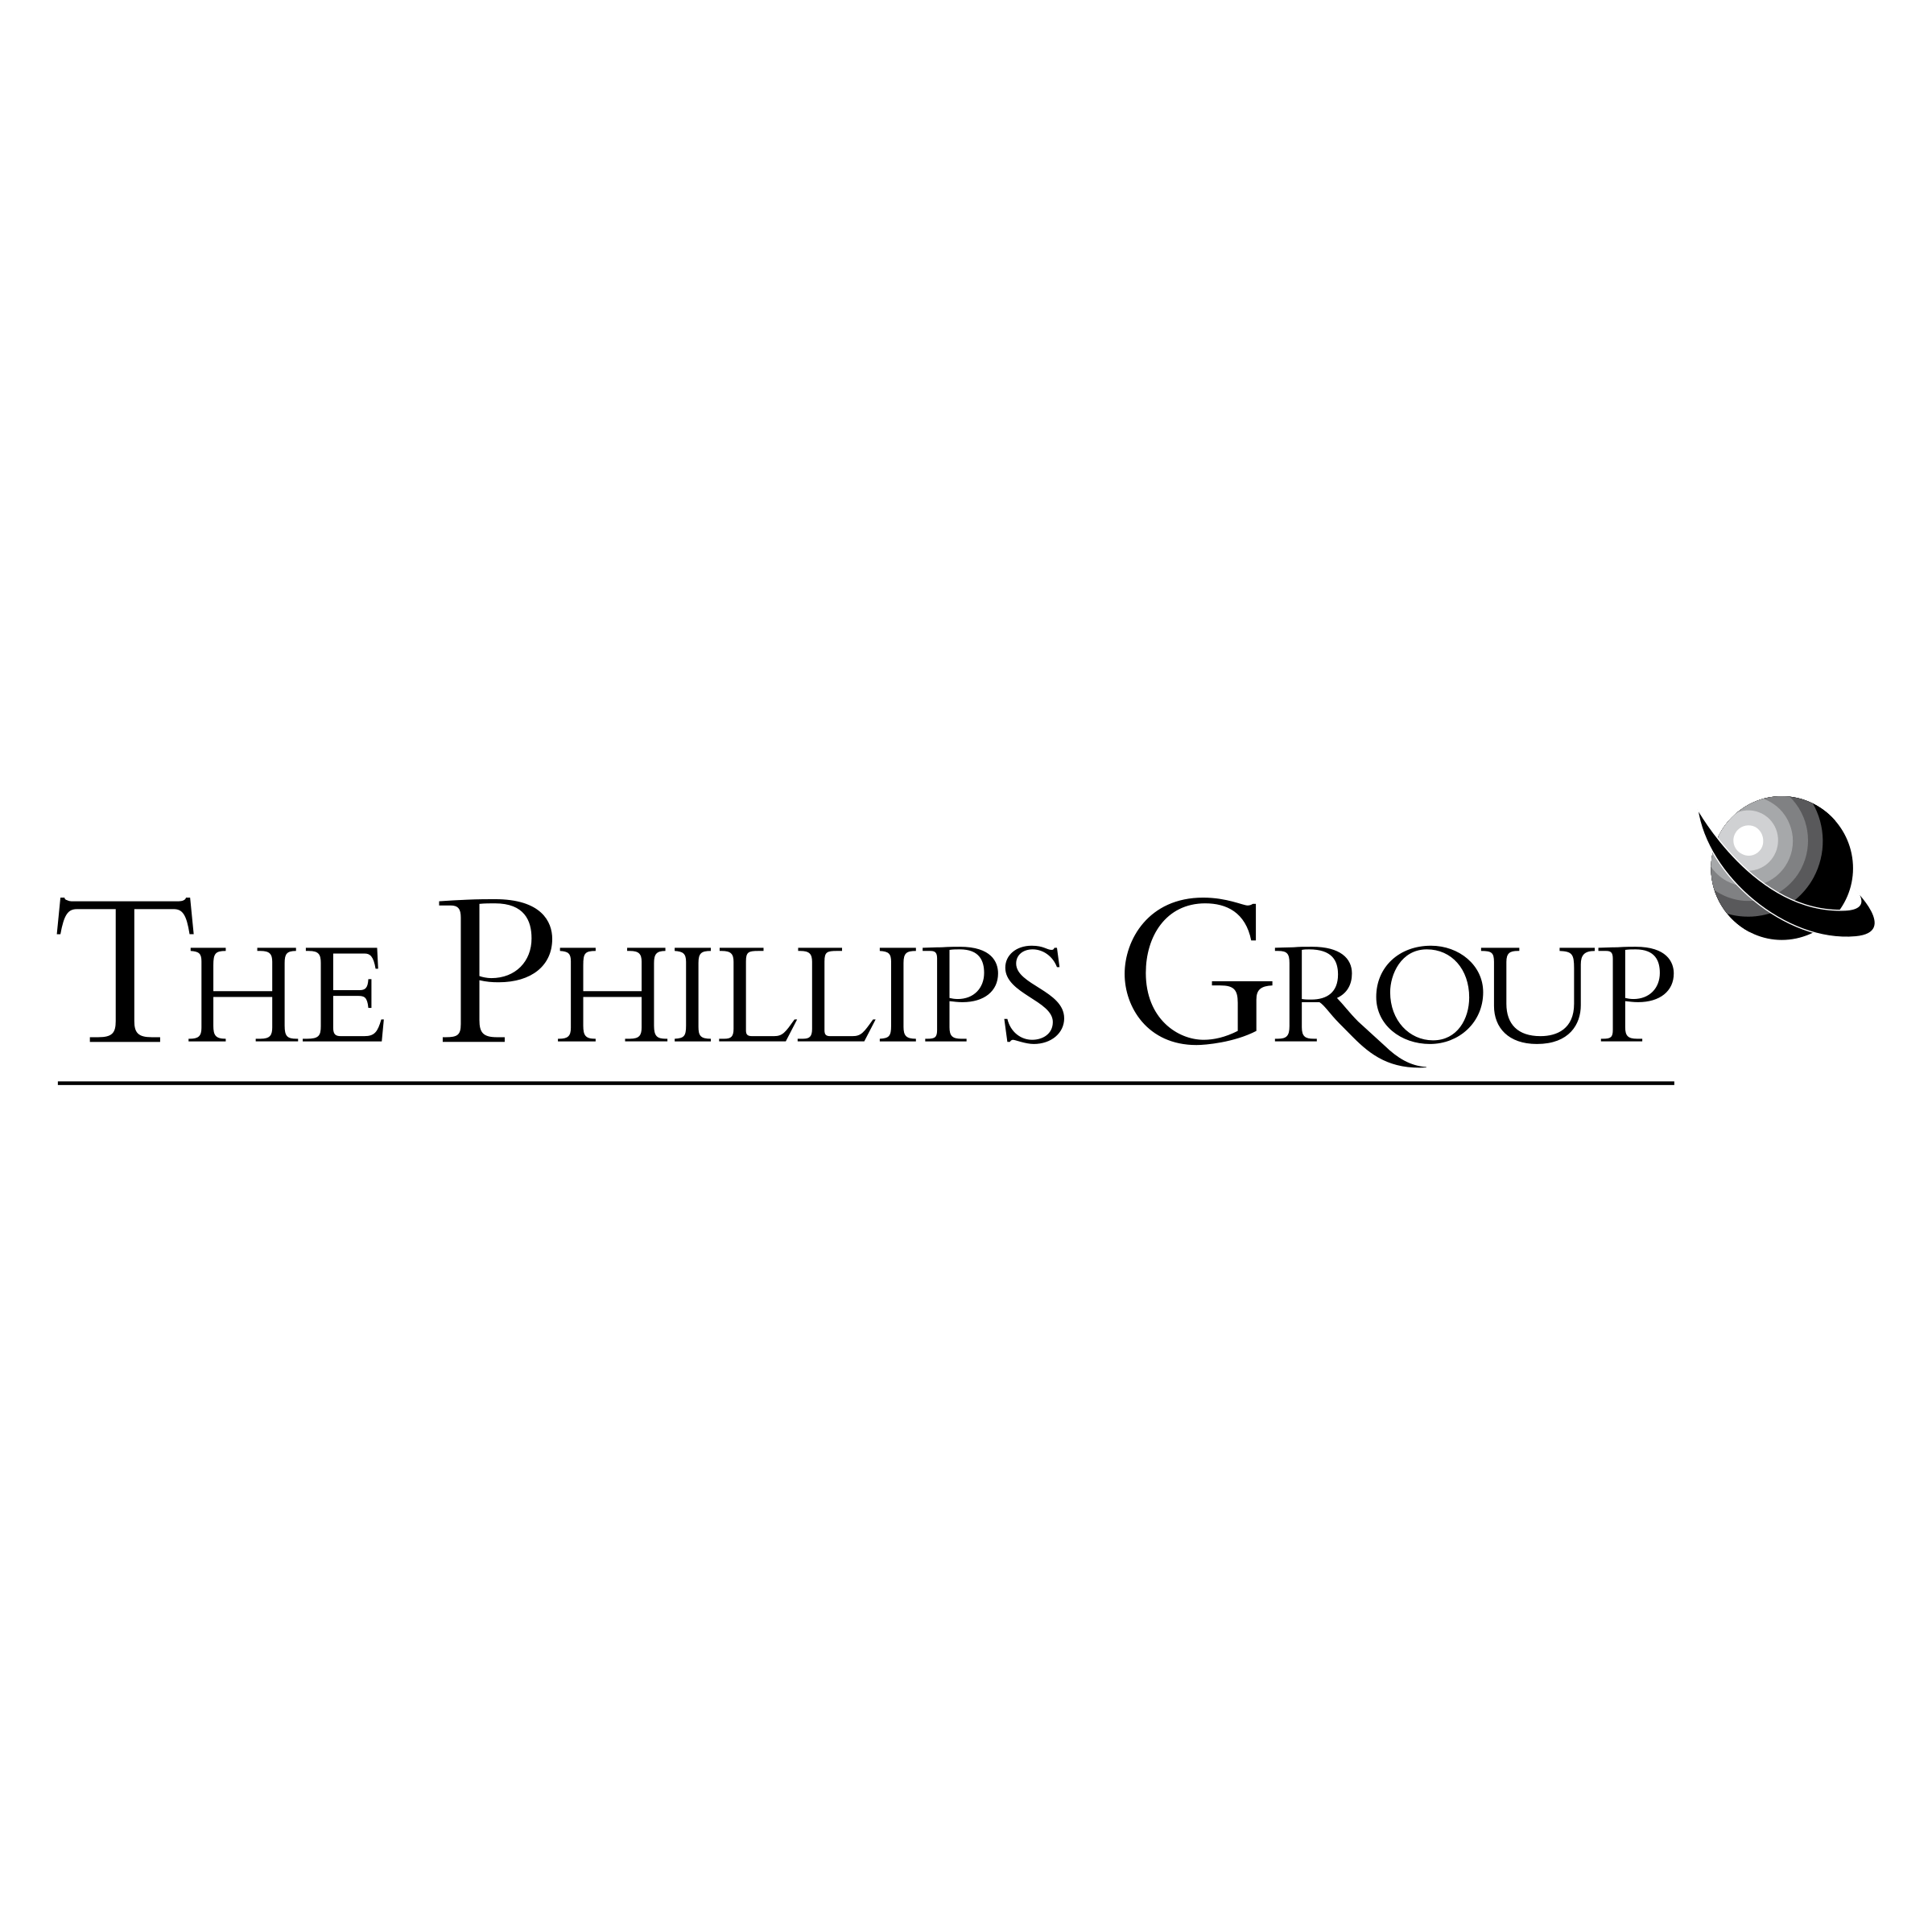 Phillips Supply Logo - The Phillips Group Logo PNG Transparent & SVG Vector - Freebie Supply